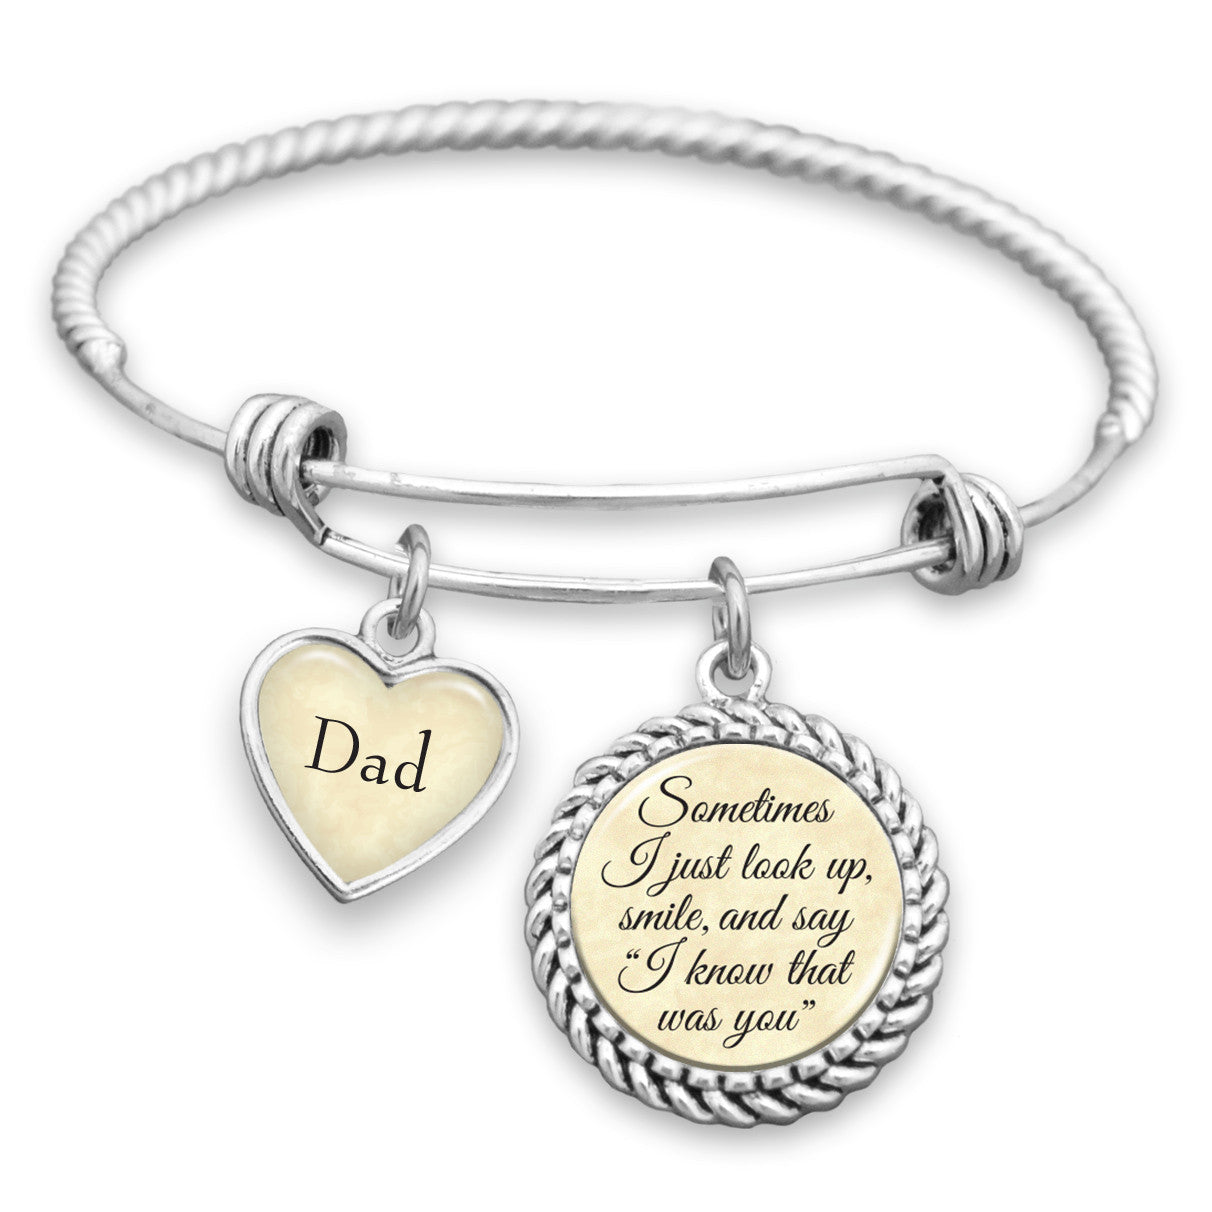 Know That Was You Personalized Name Bracelet